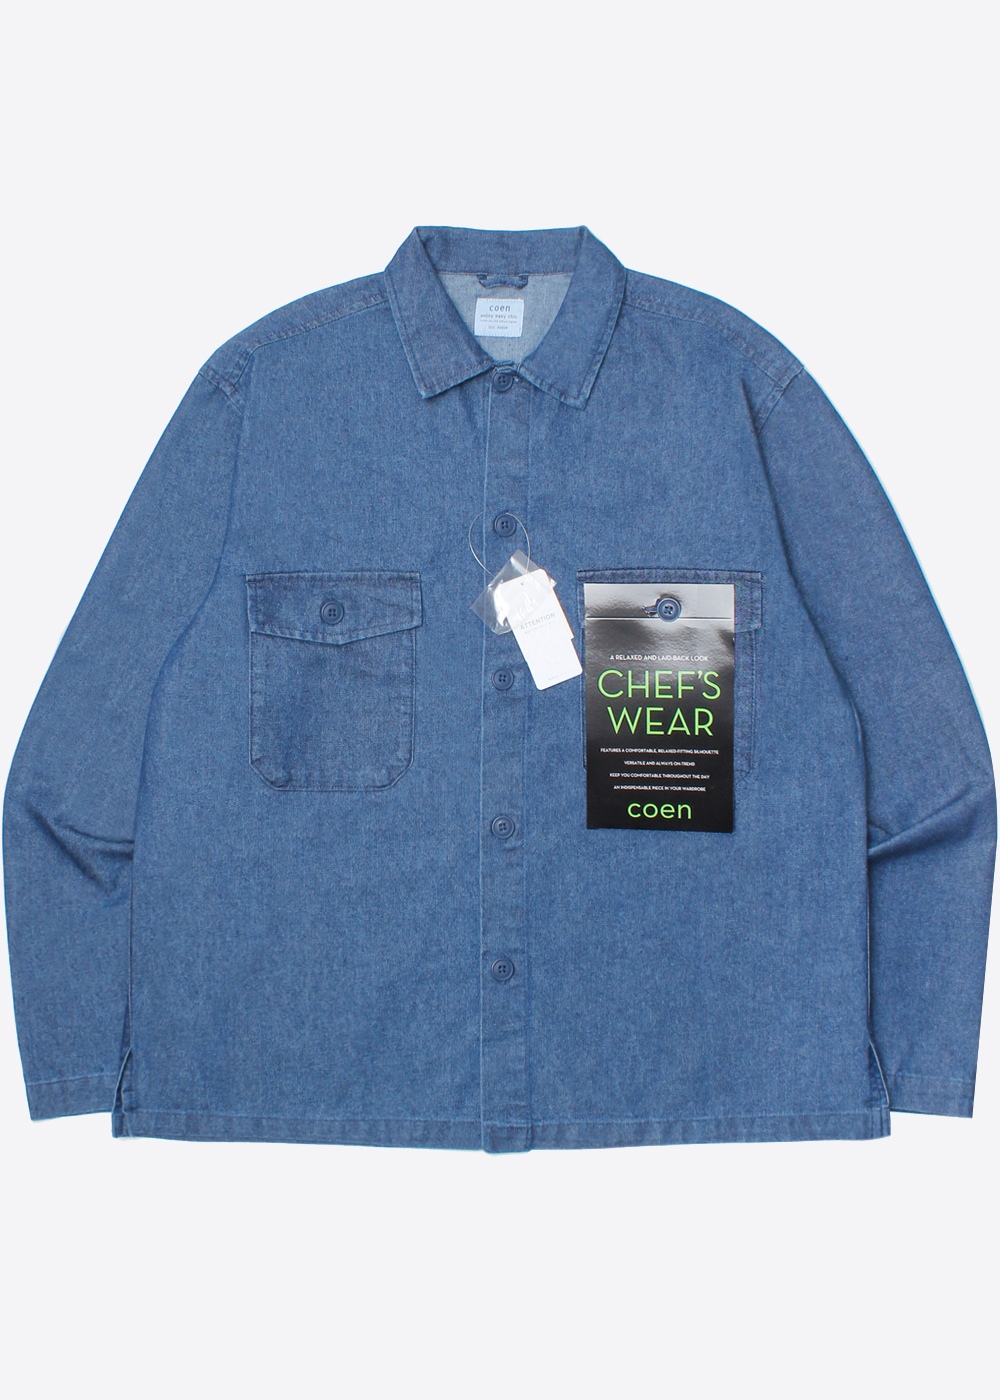 COEN BY UNITED ARROWS’over fit’ denim shirt jacket